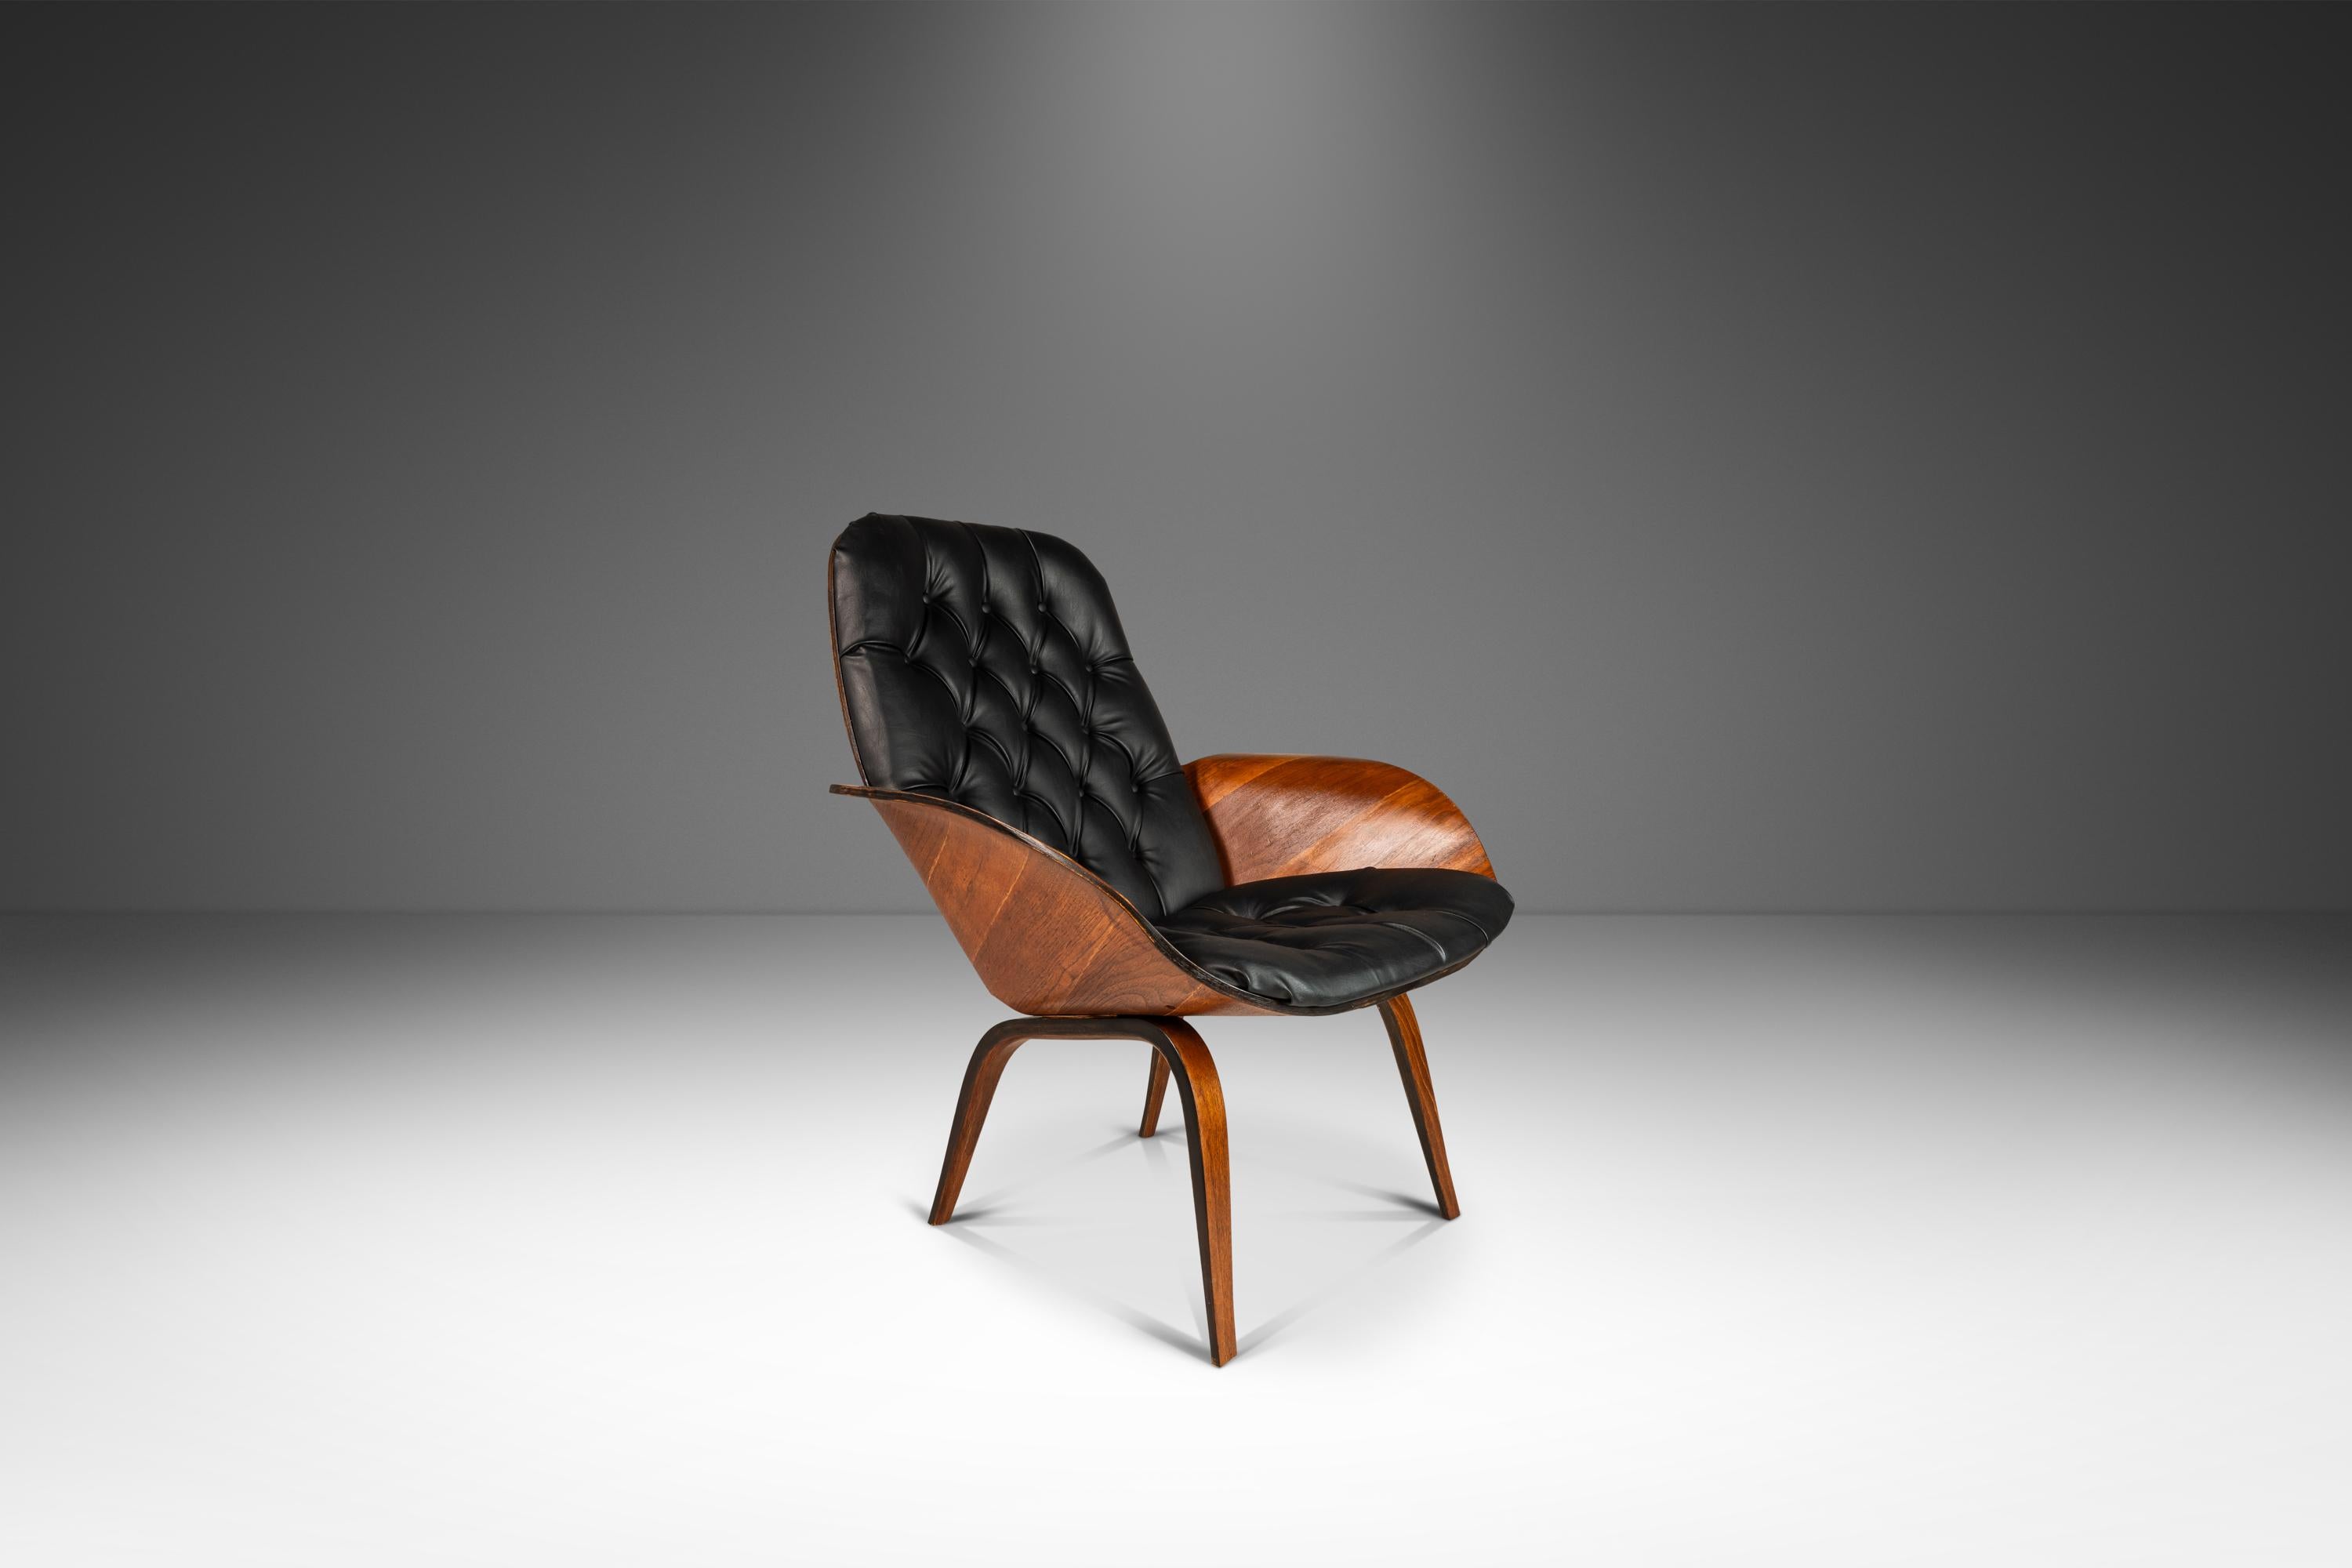 Mrs. Lounge Chair in Walnut & Vinyl by George Mulhauser for Plycraft, c. 1960s For Sale 5